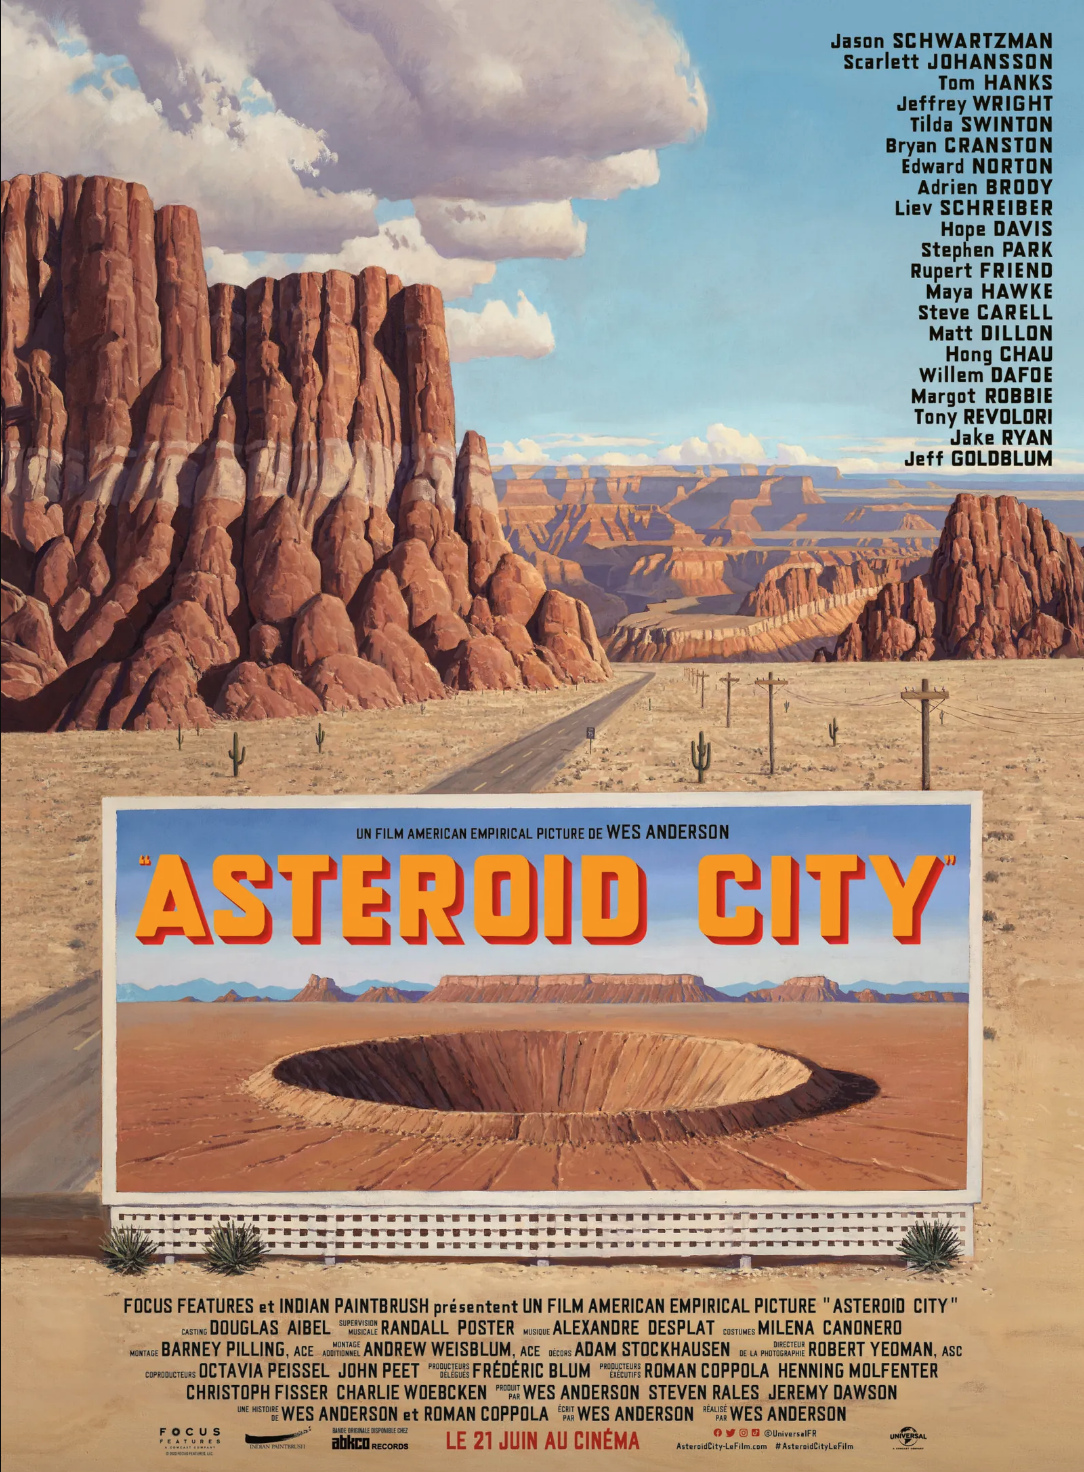 Asteroid City: Wes Andersons absurdist masterpiece